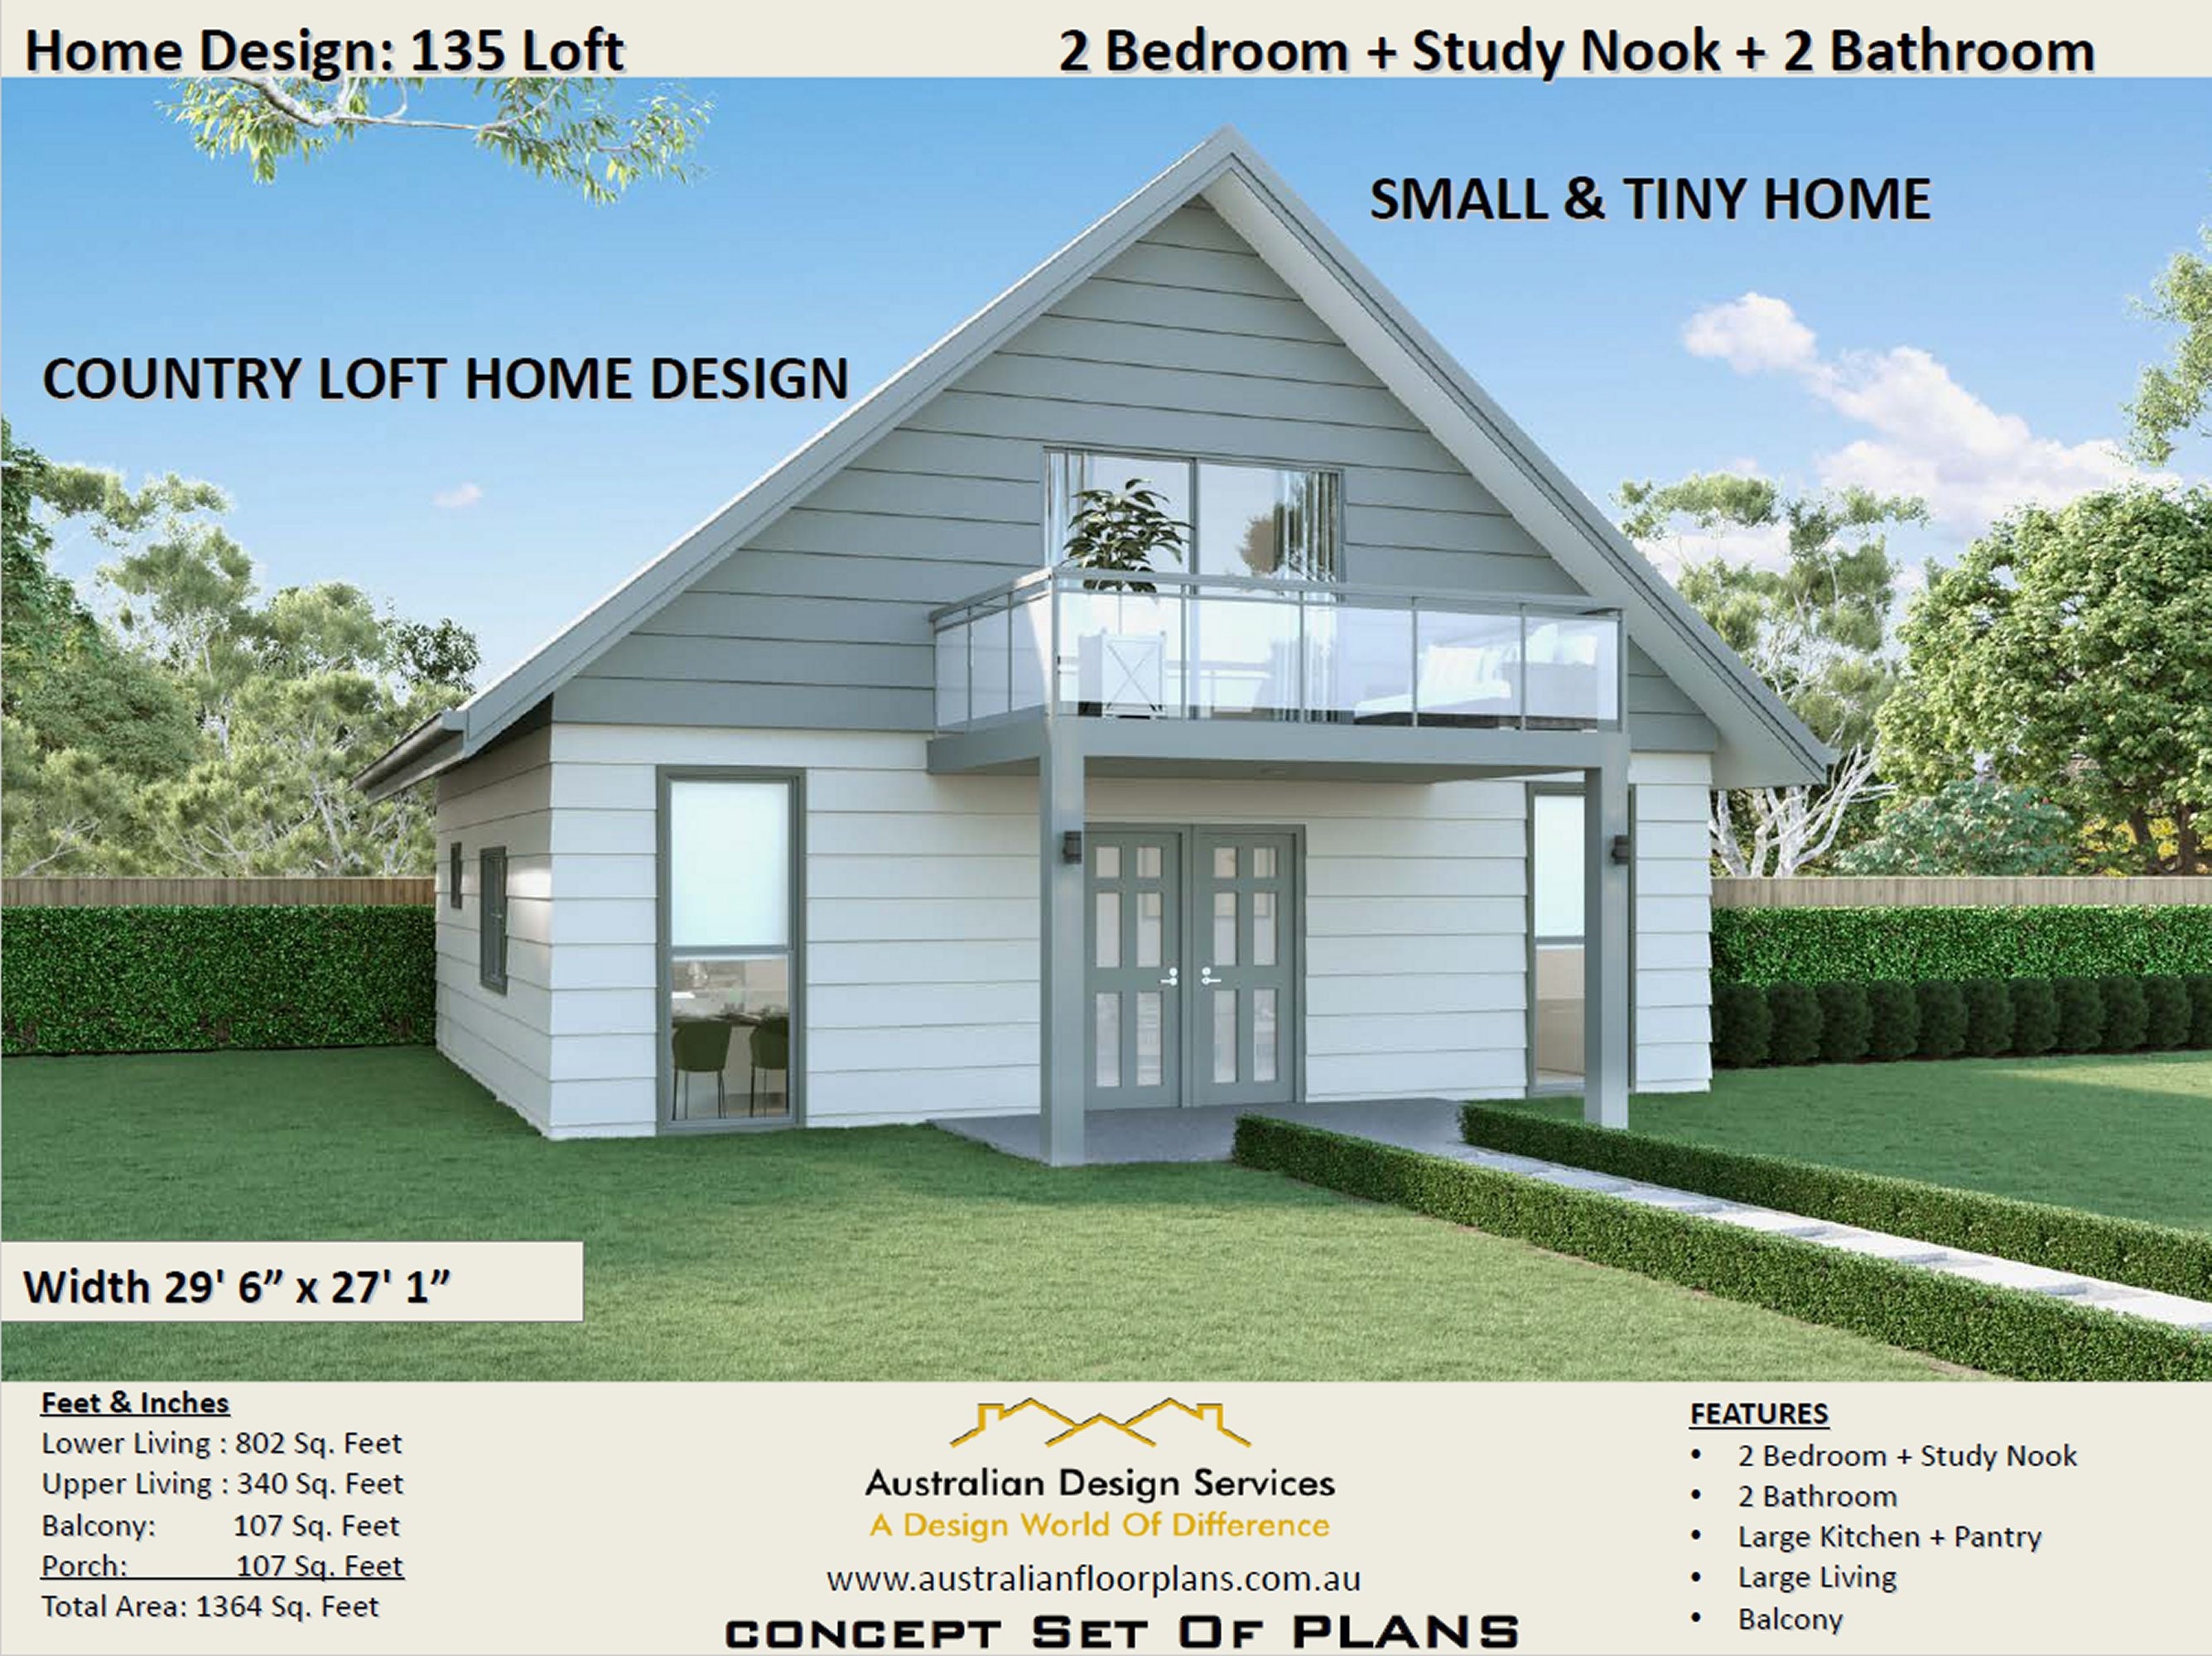 Small Home Design   Country Loft 200 Bedroom 200 Bathroom House Plans For Sale    20 Sq. Feet